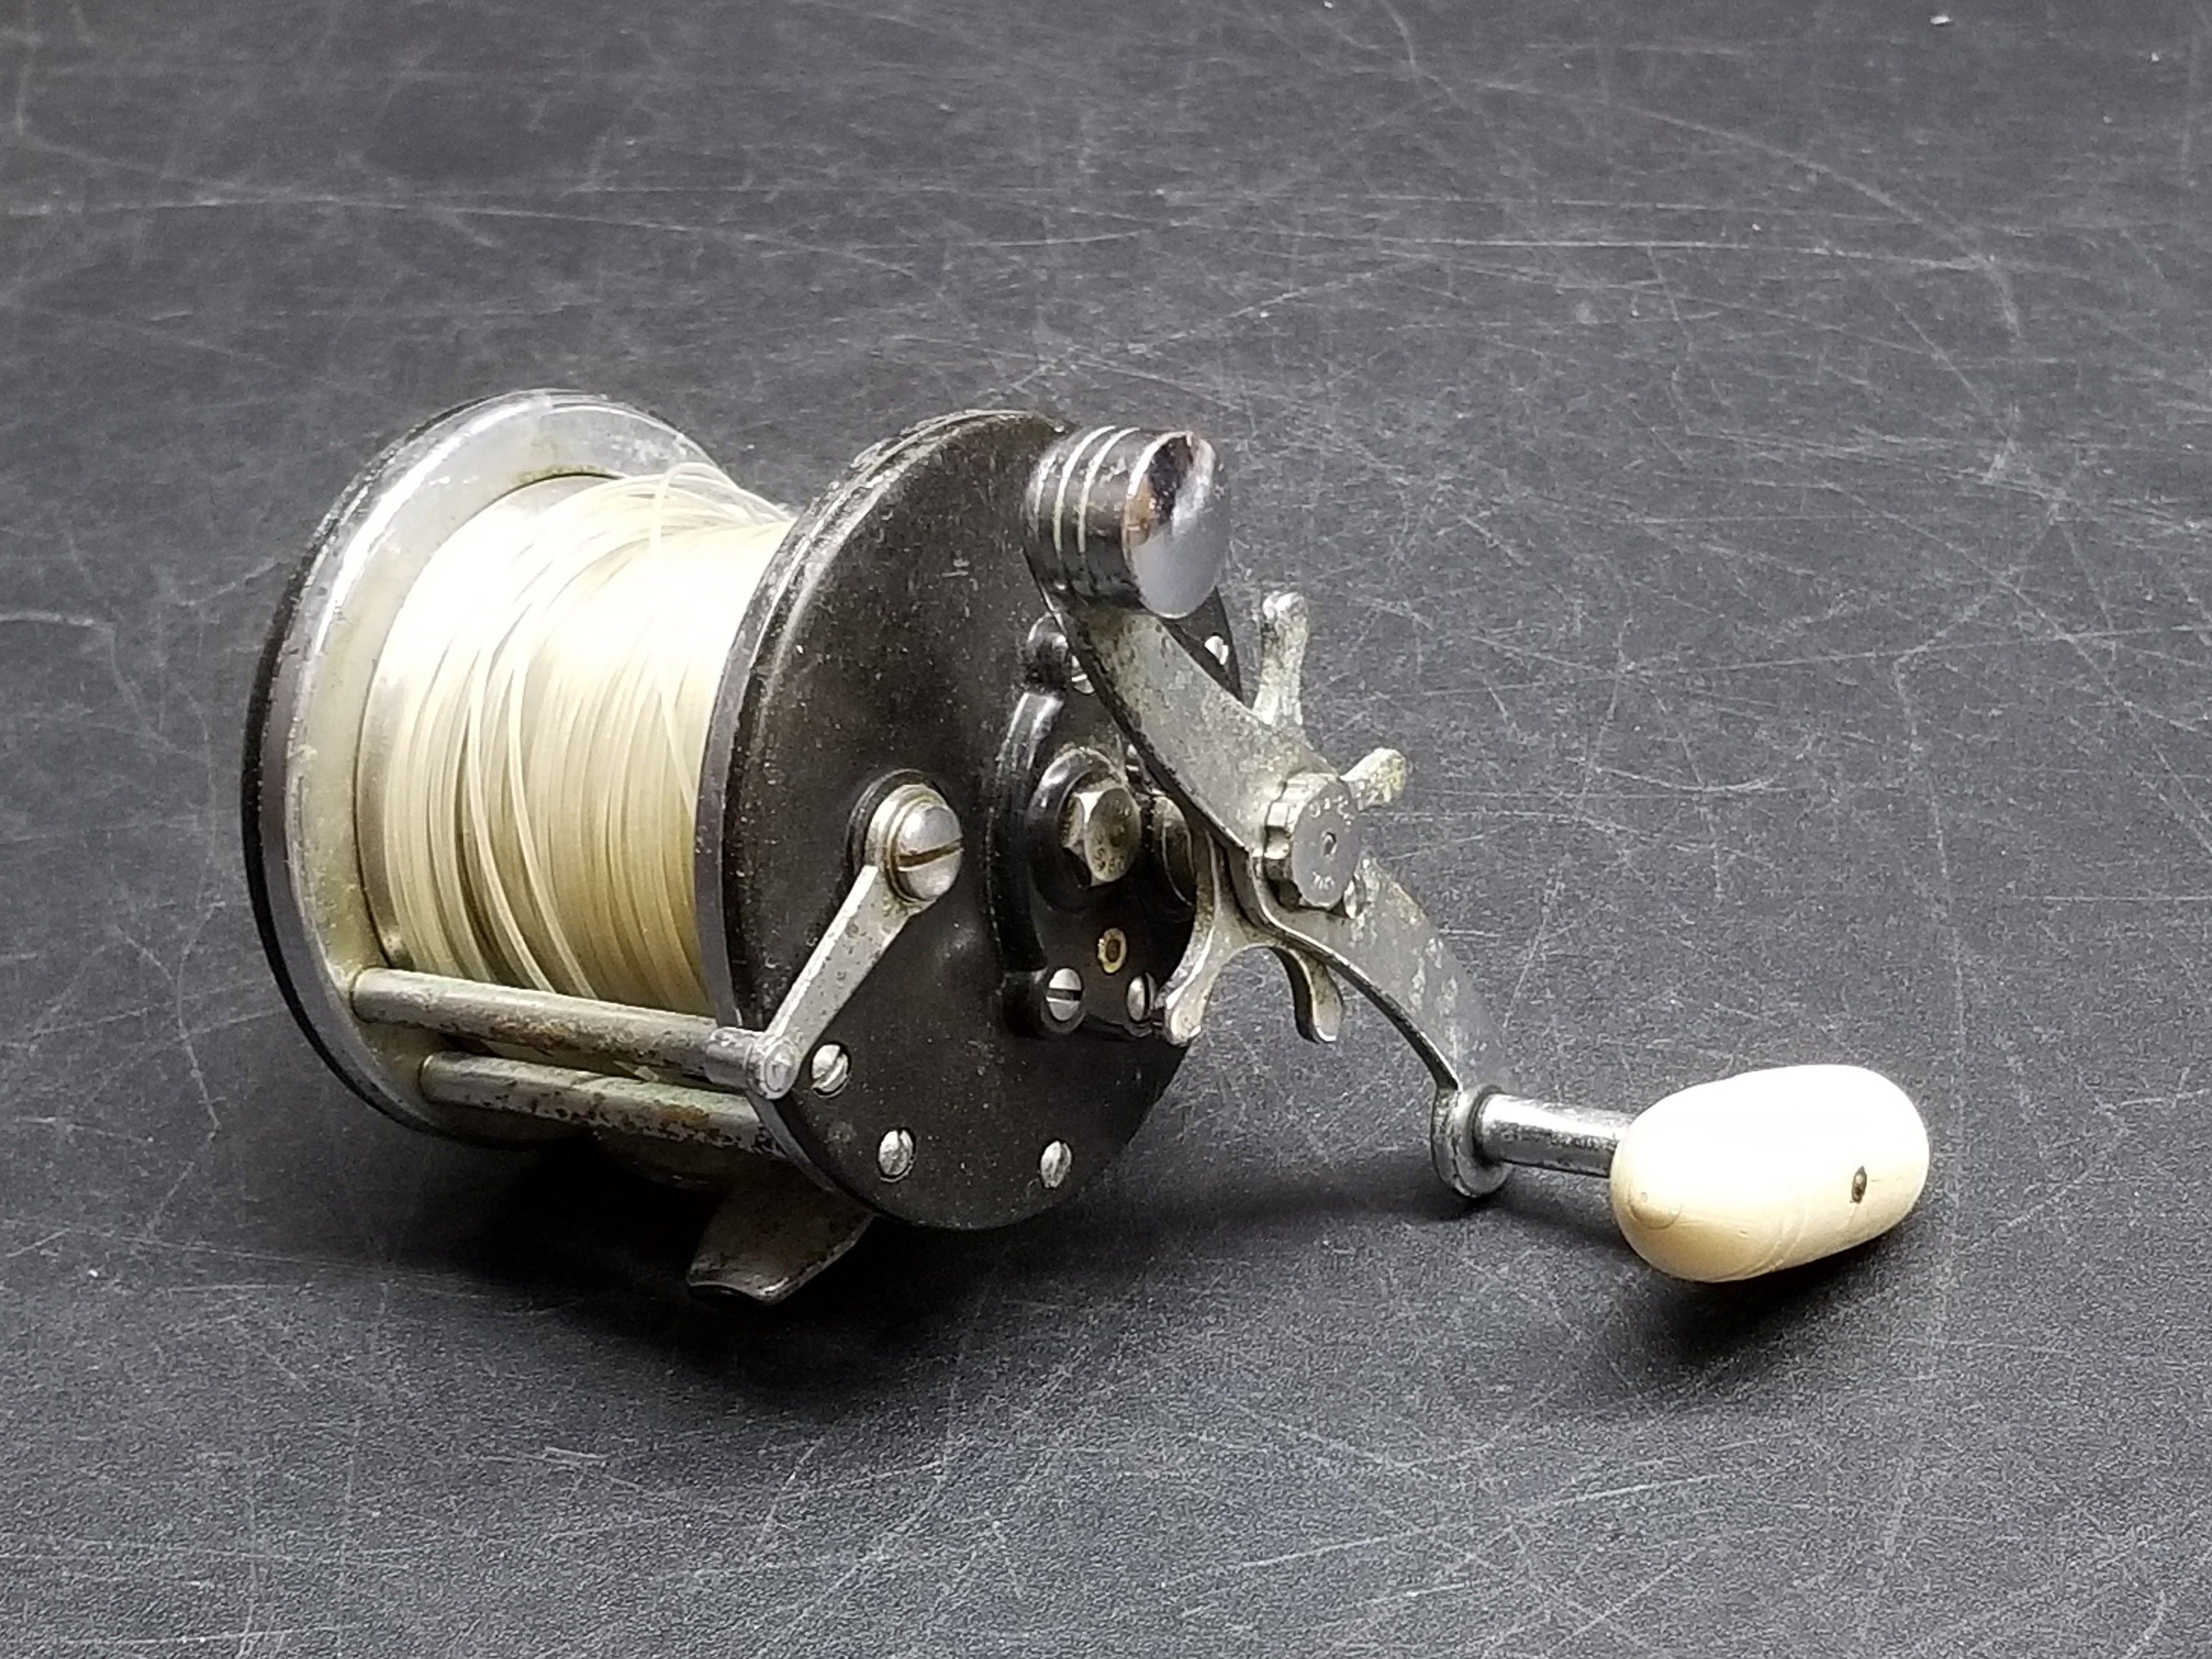 Vintage Mitchell 3-0-0 Spinning Fishing Reel, Circa 1950's Made in